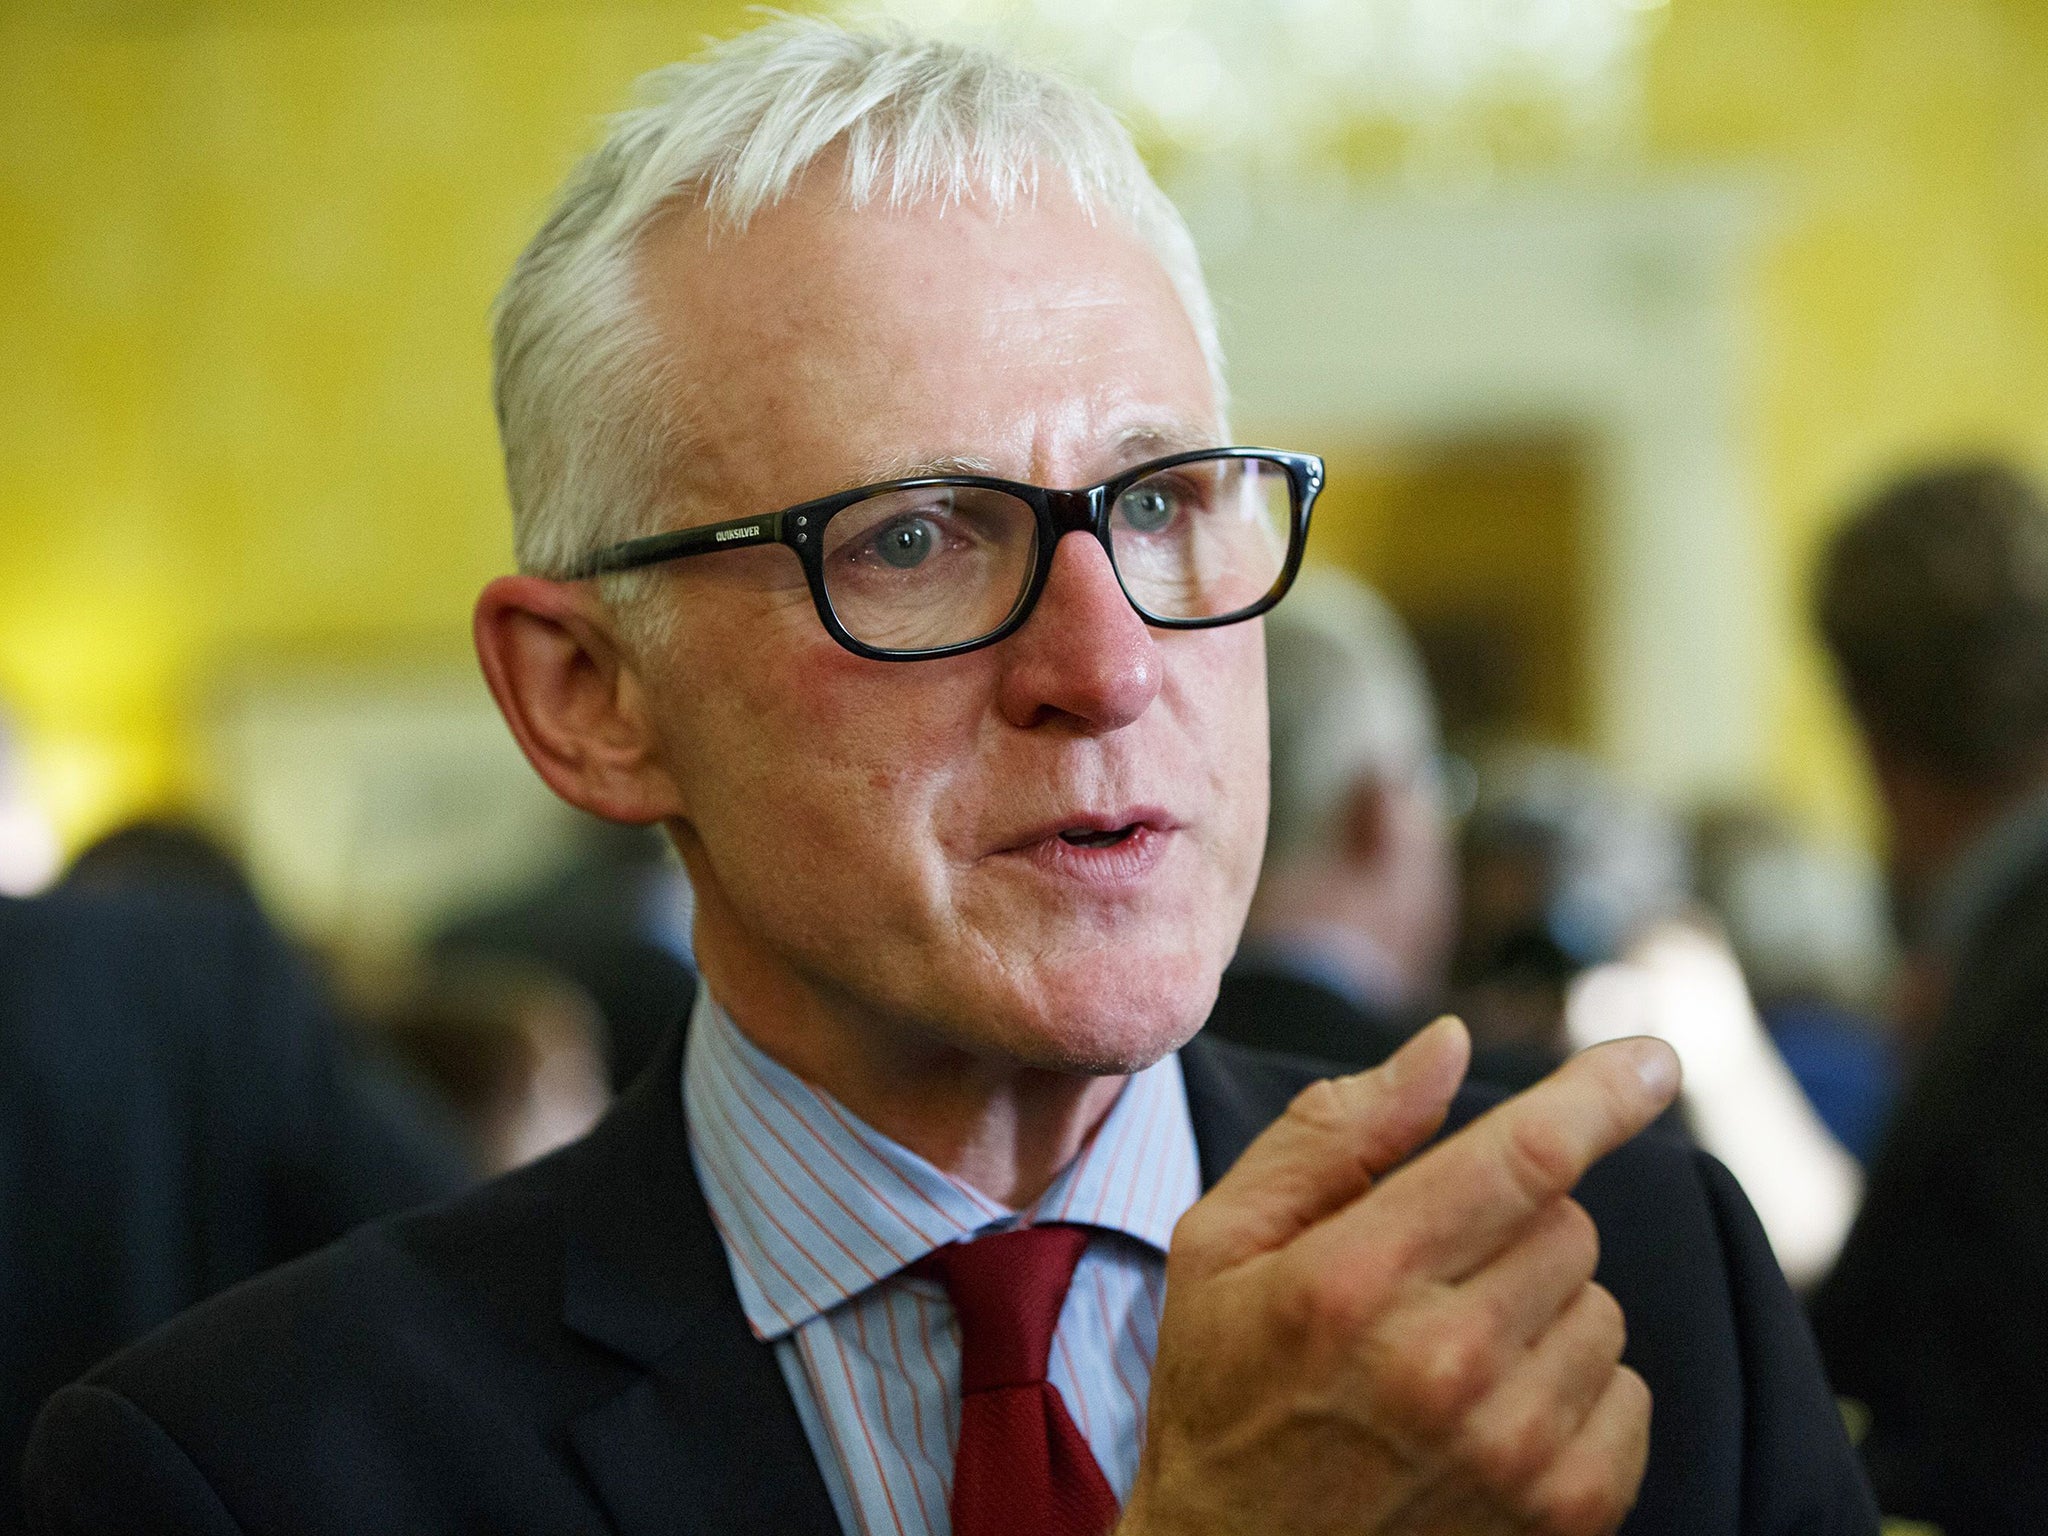 Liberal Democrat MP Norman Lamb described Theresa May's pledges on mental healthcare as a 'puny response to a burning injustic'